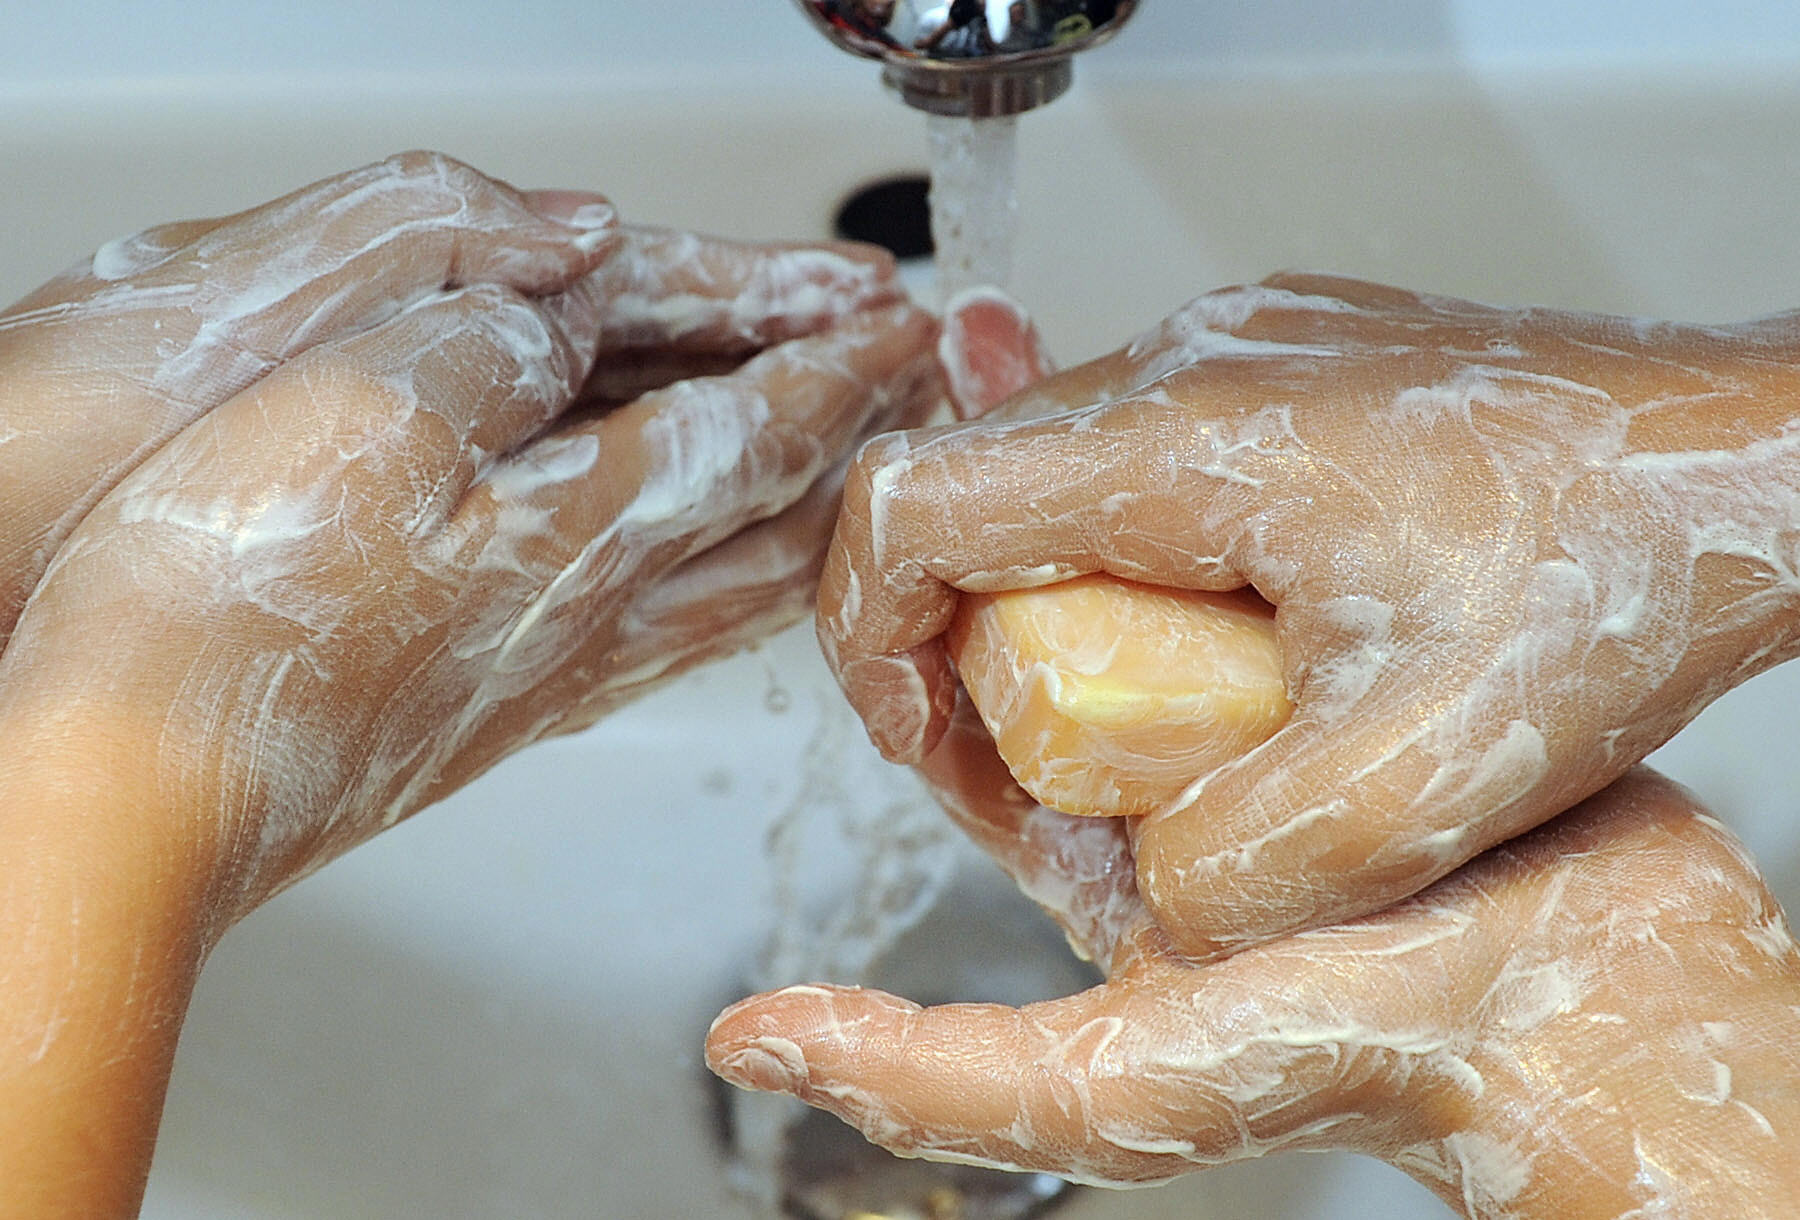 Hand washing: 6 steps to kill the germs on your hands | Globalnews.ca